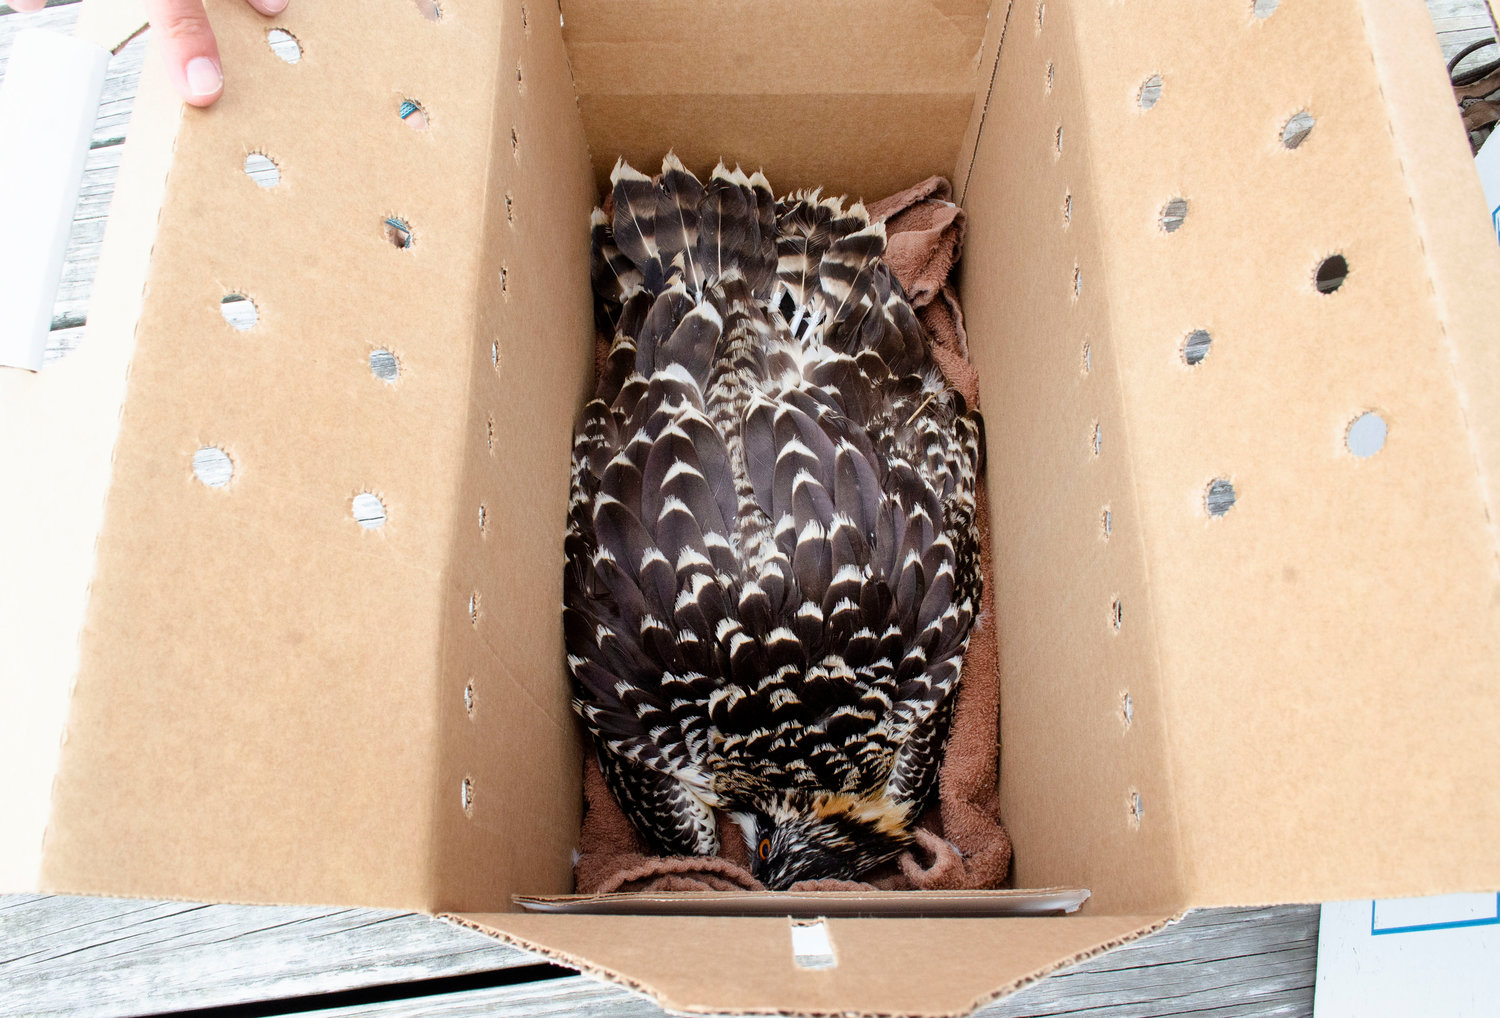 An osprey fledgling lays quietly in a cardboard box, as it sits on the dock, waiting to be transported by car to the New Bedford Regional Airport.